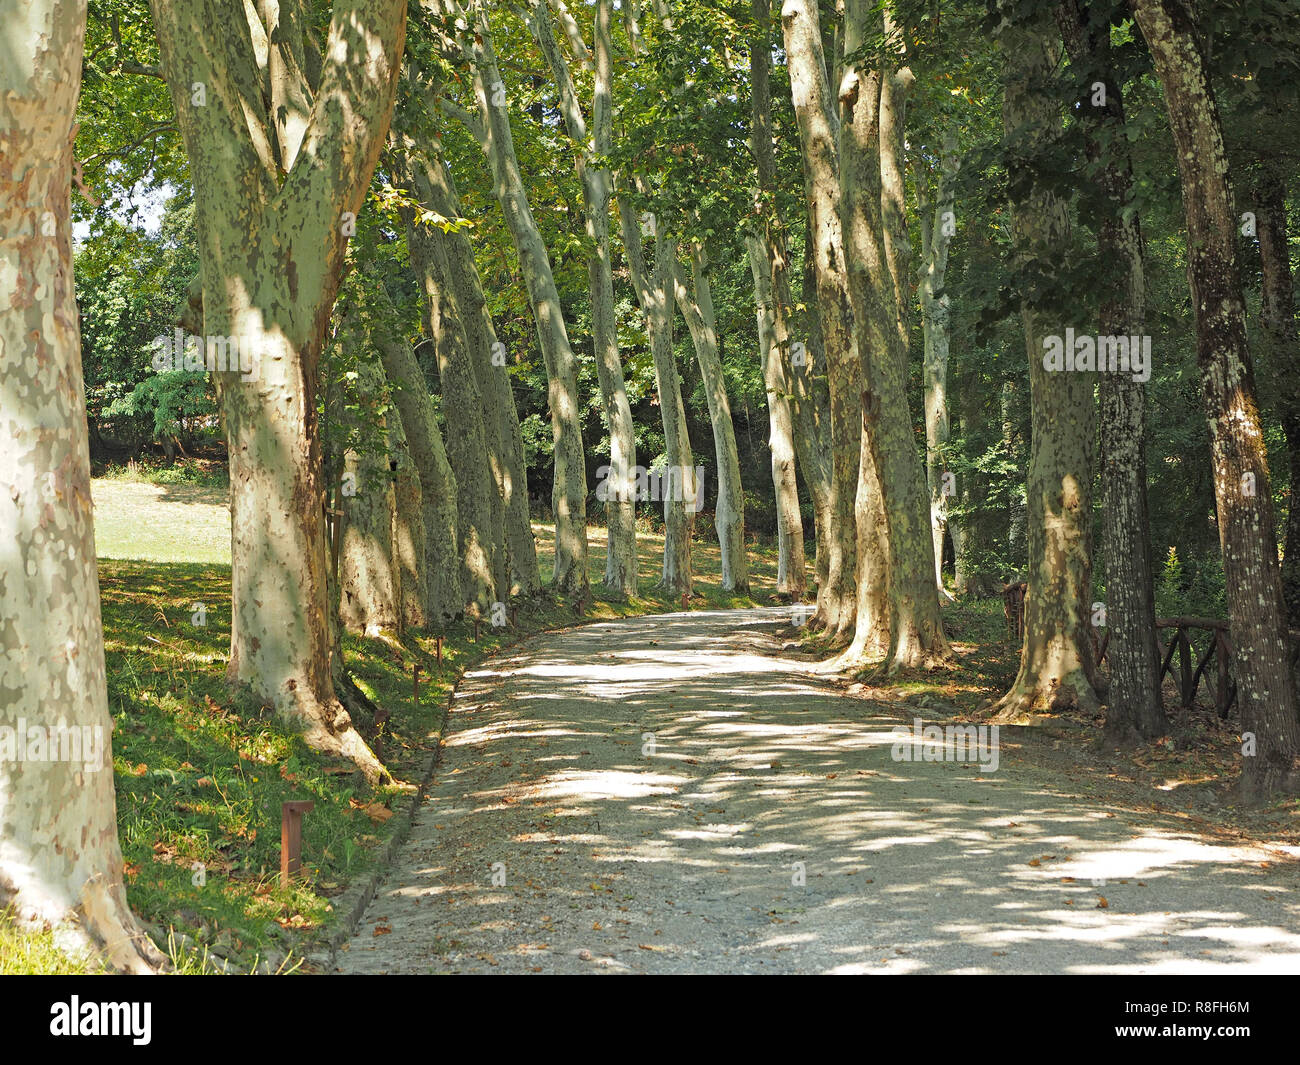 Avenue of mature London Plane trees (Platanus x acerifolia) lining a sweeping drive in a Medici park in Summer - Tuscany,Italy Stock Photo